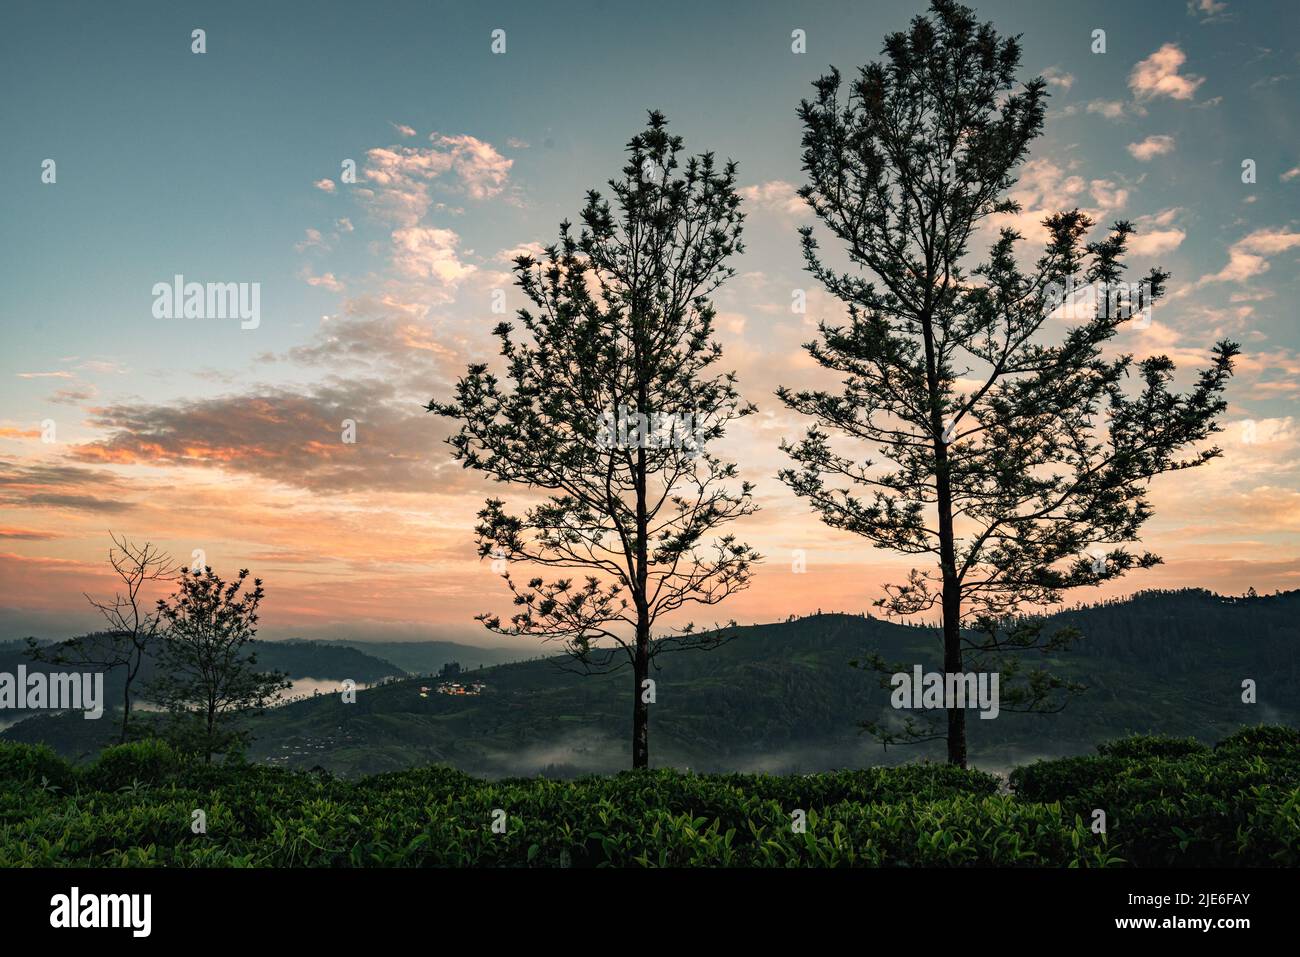 A sunset view with colorful sky and patchy clouds and silhouette of tree Stock Photo